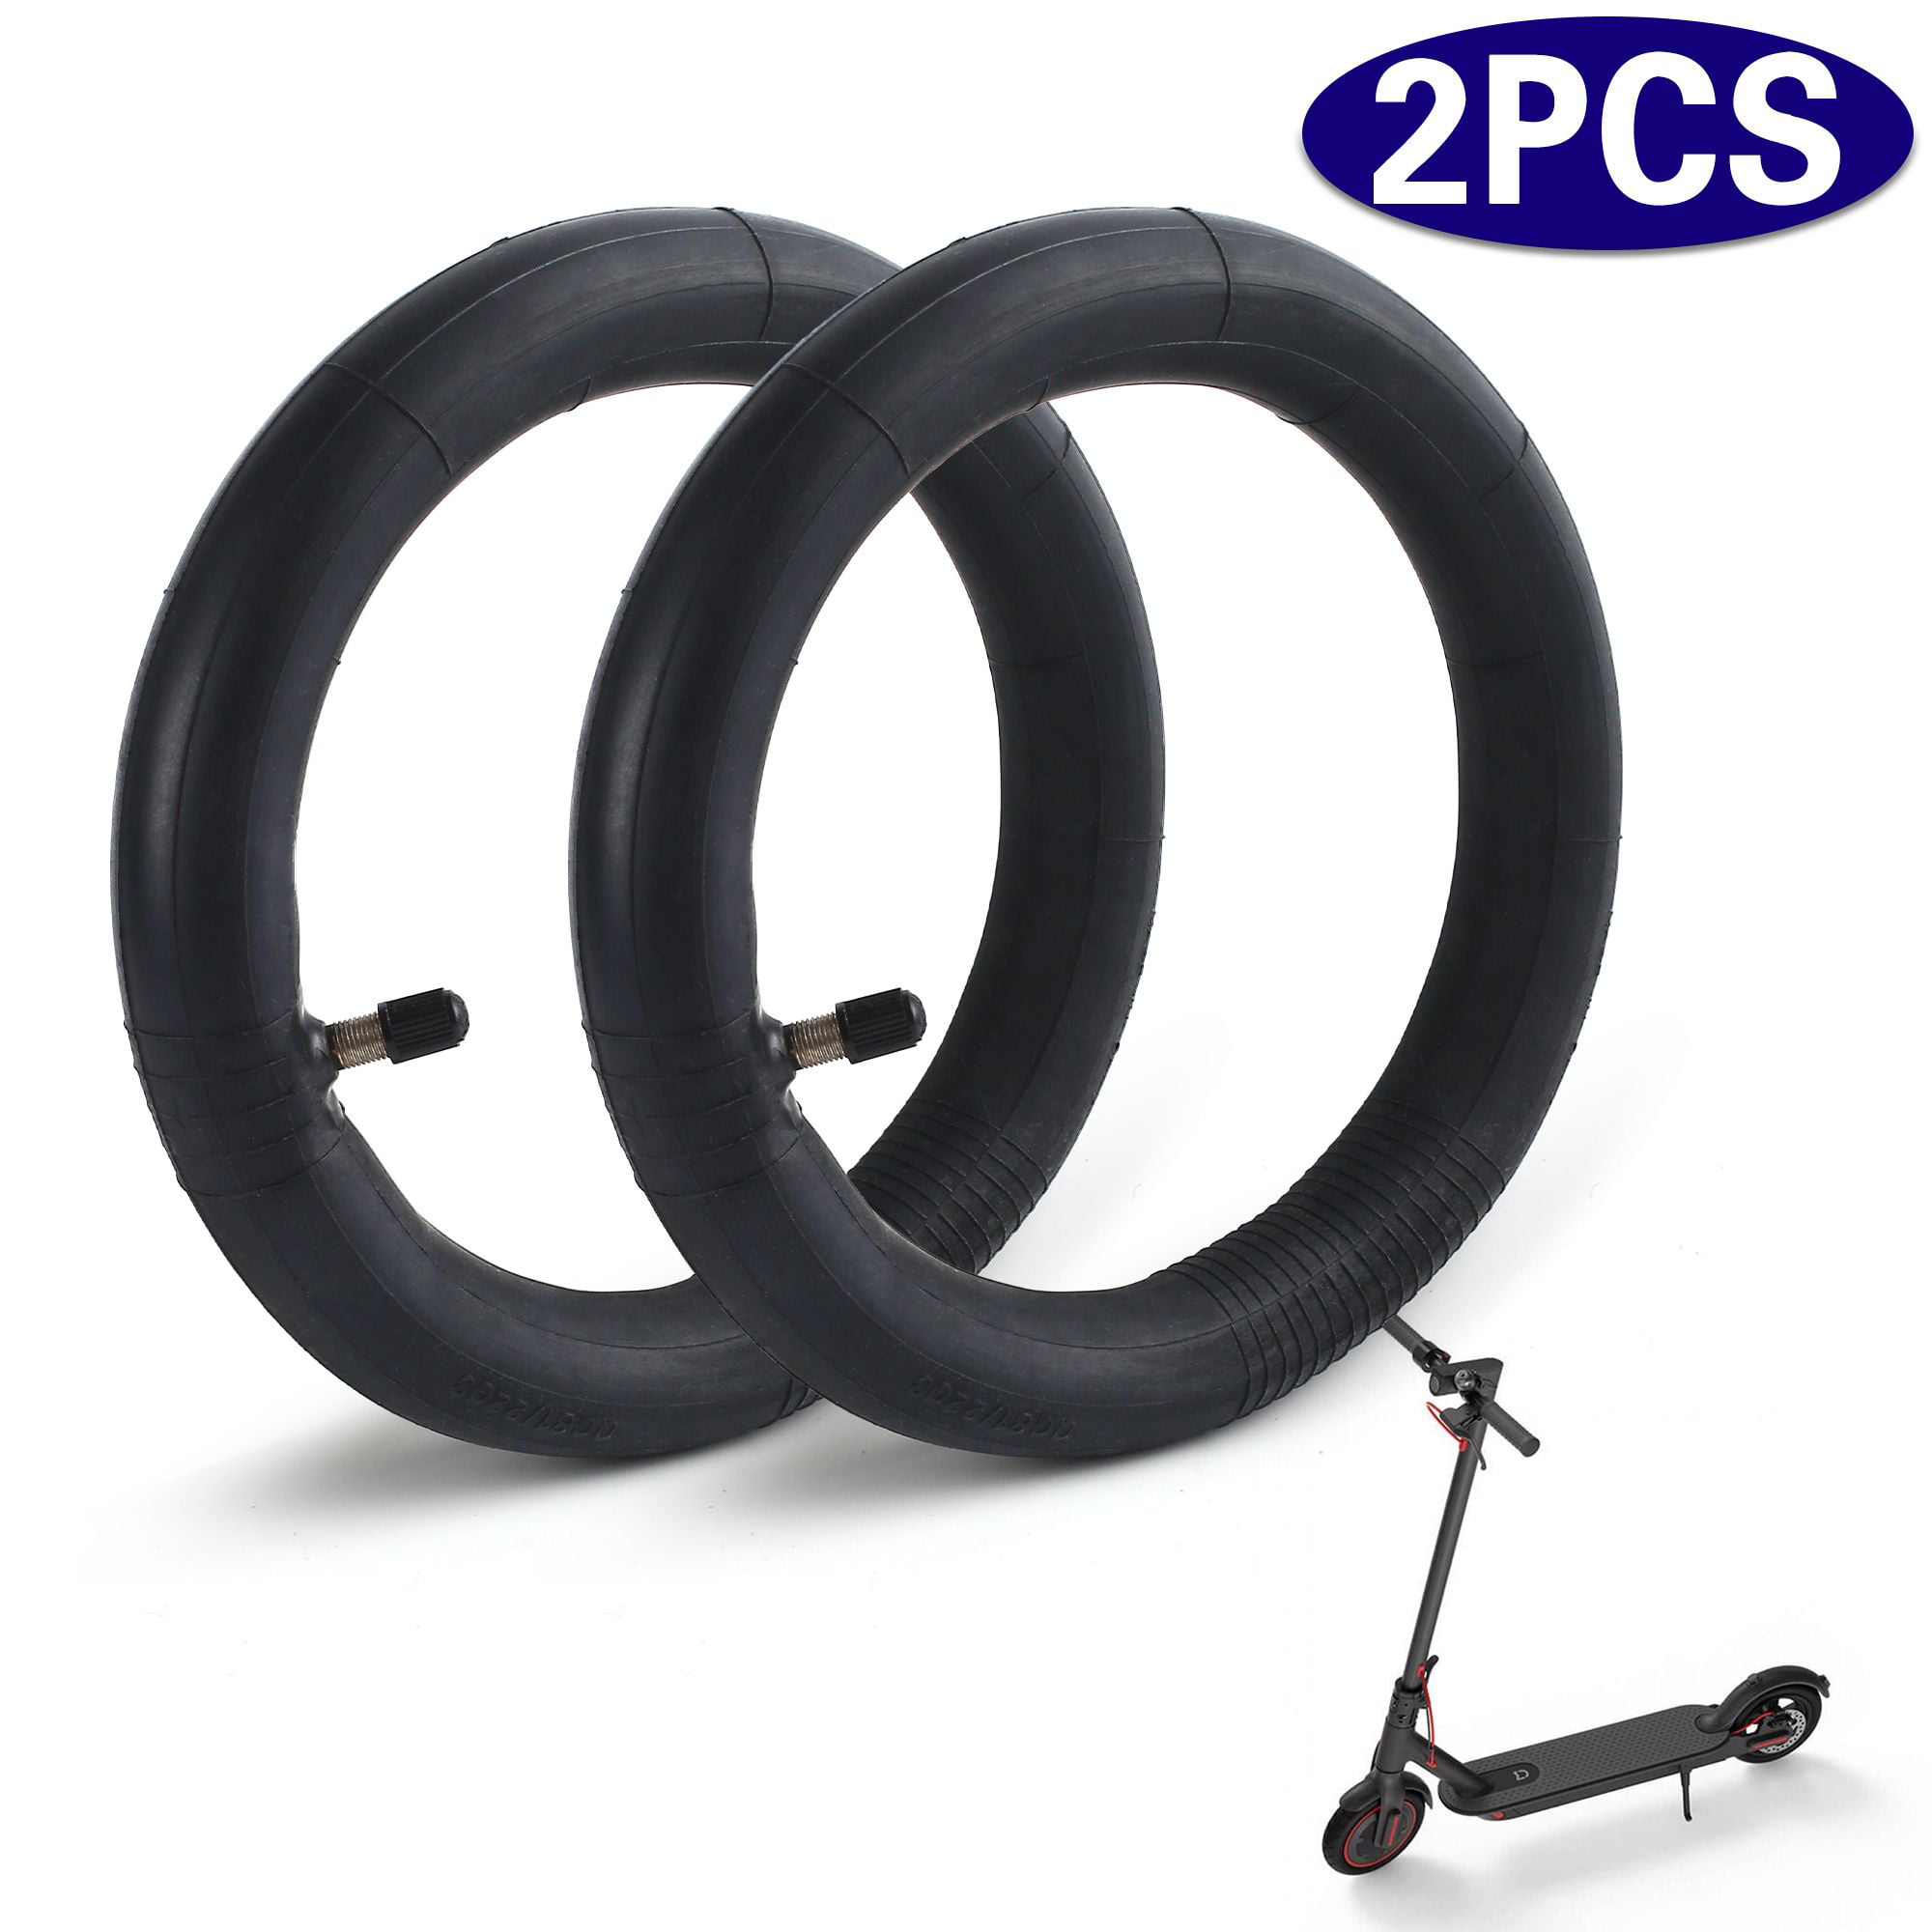 10 Inch Vacuum Tire/Inner Tube 10x2.50 Bent Extended Valve For Electric Scooter